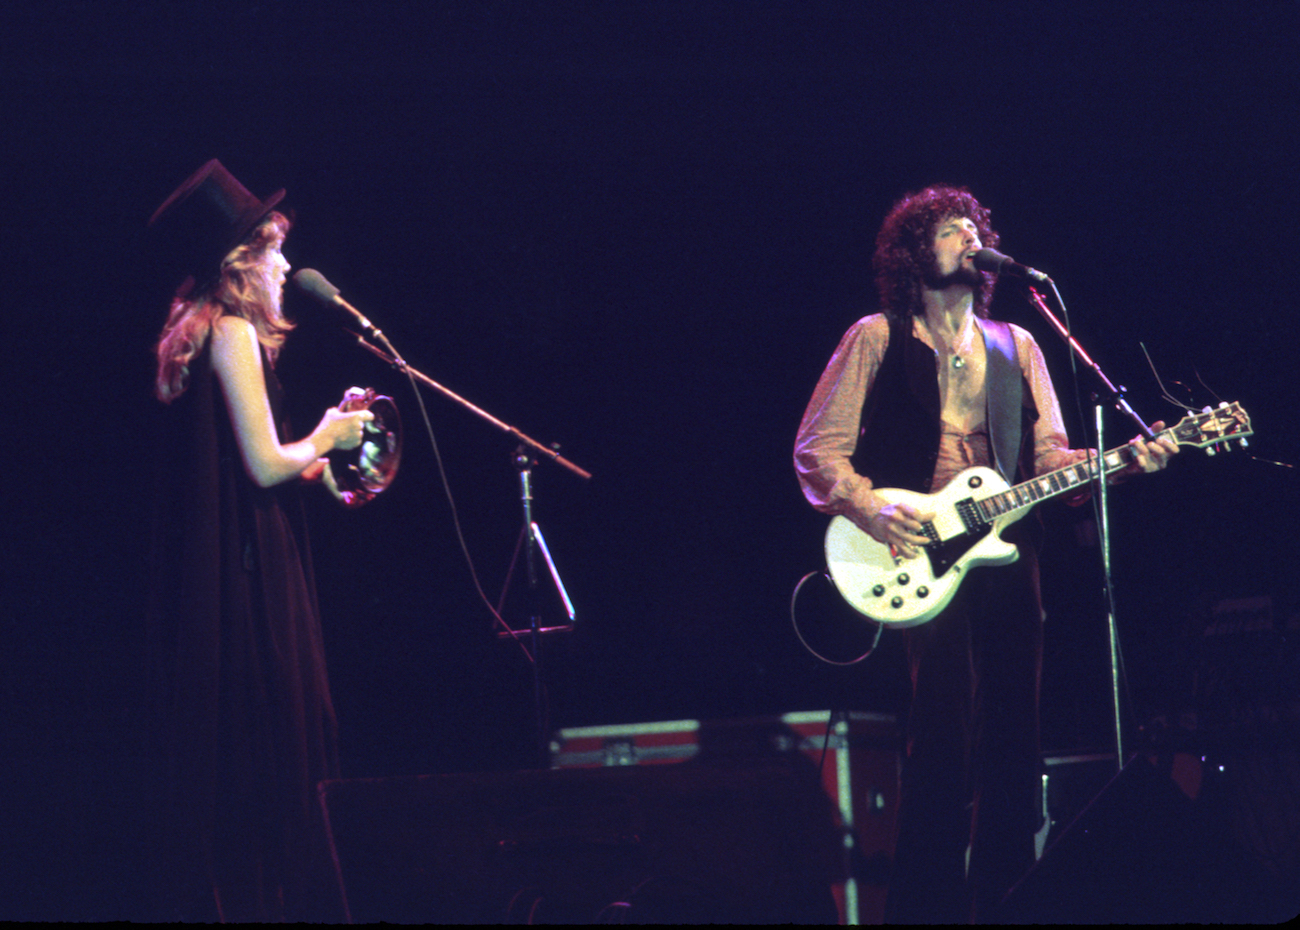 Stevie Nicks and Lindsey Buckingham performing with Fleetwood Mac in 1977.